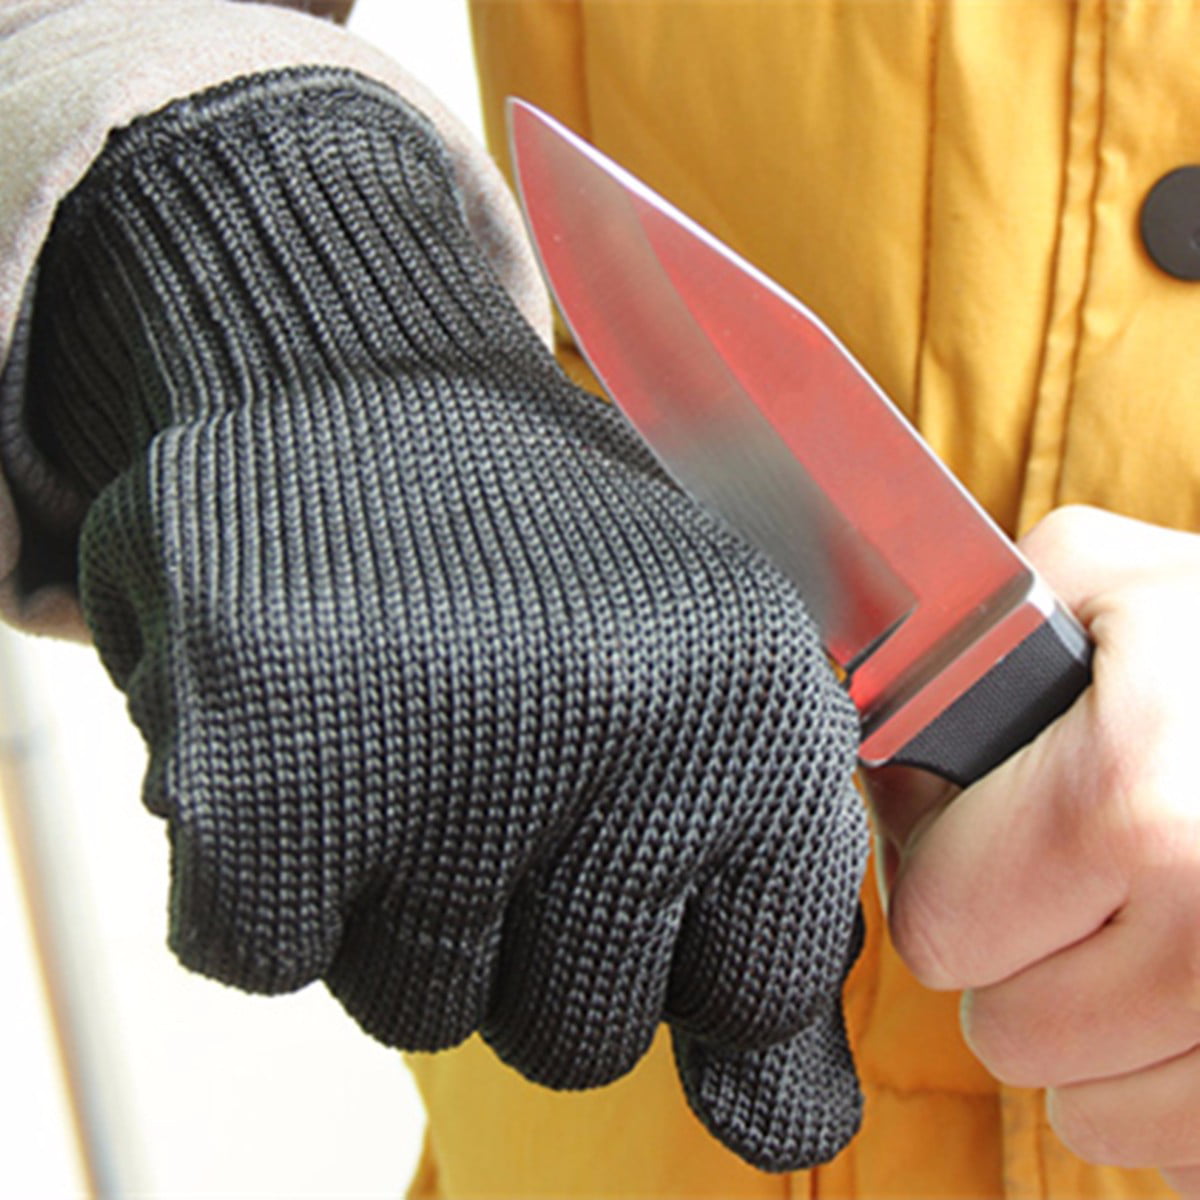 GLOVES CUT RESISTANT SAFETY FLEXIBLE KITCHEN COOKING BAR LEVEL 5 PROTECTIVE 